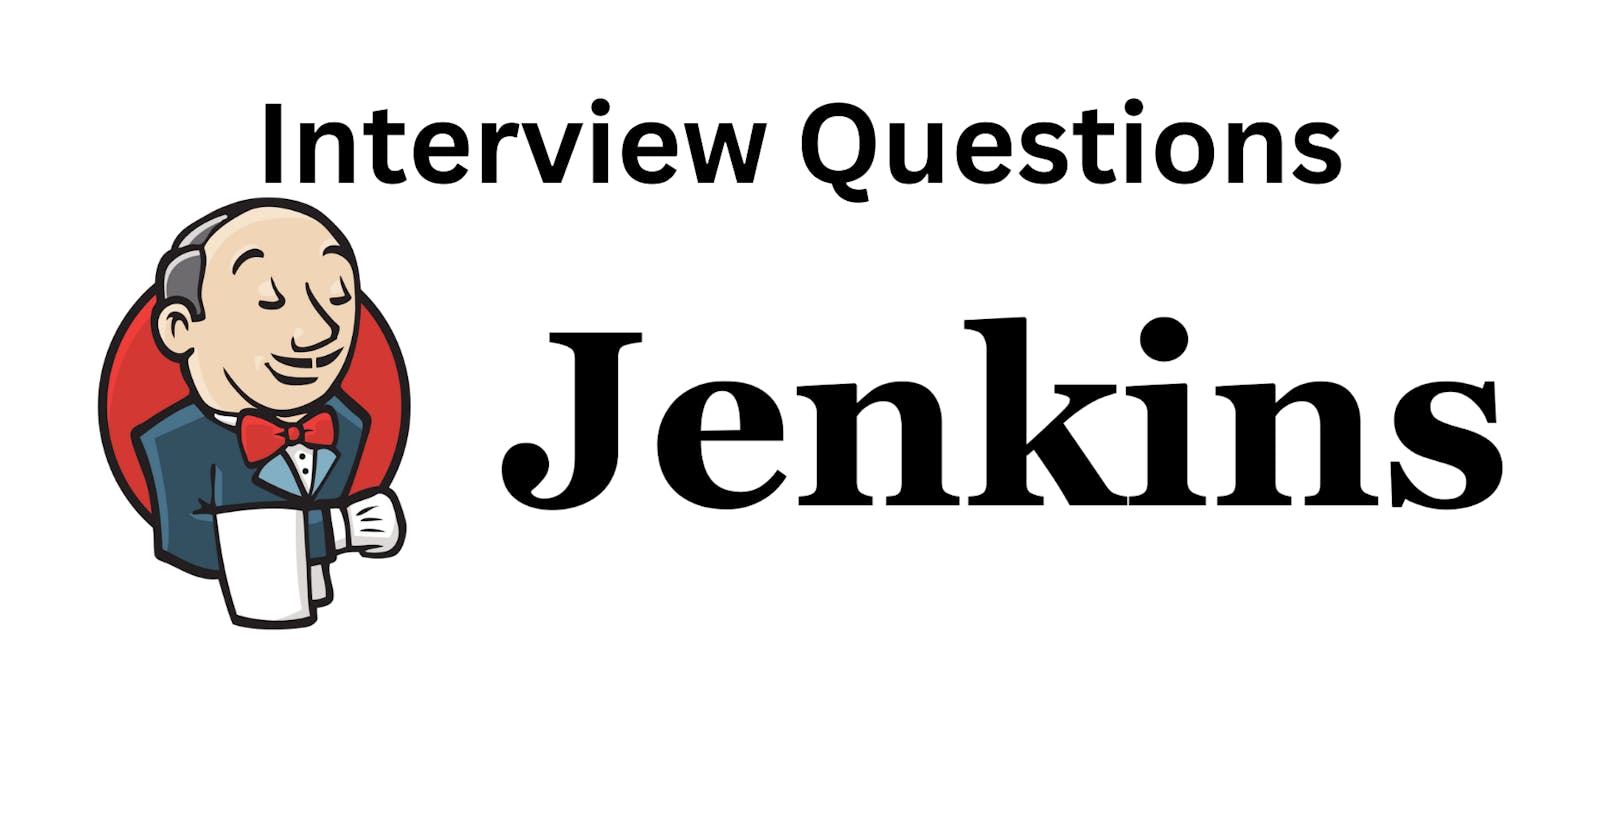 Jenkins Important interview Questions